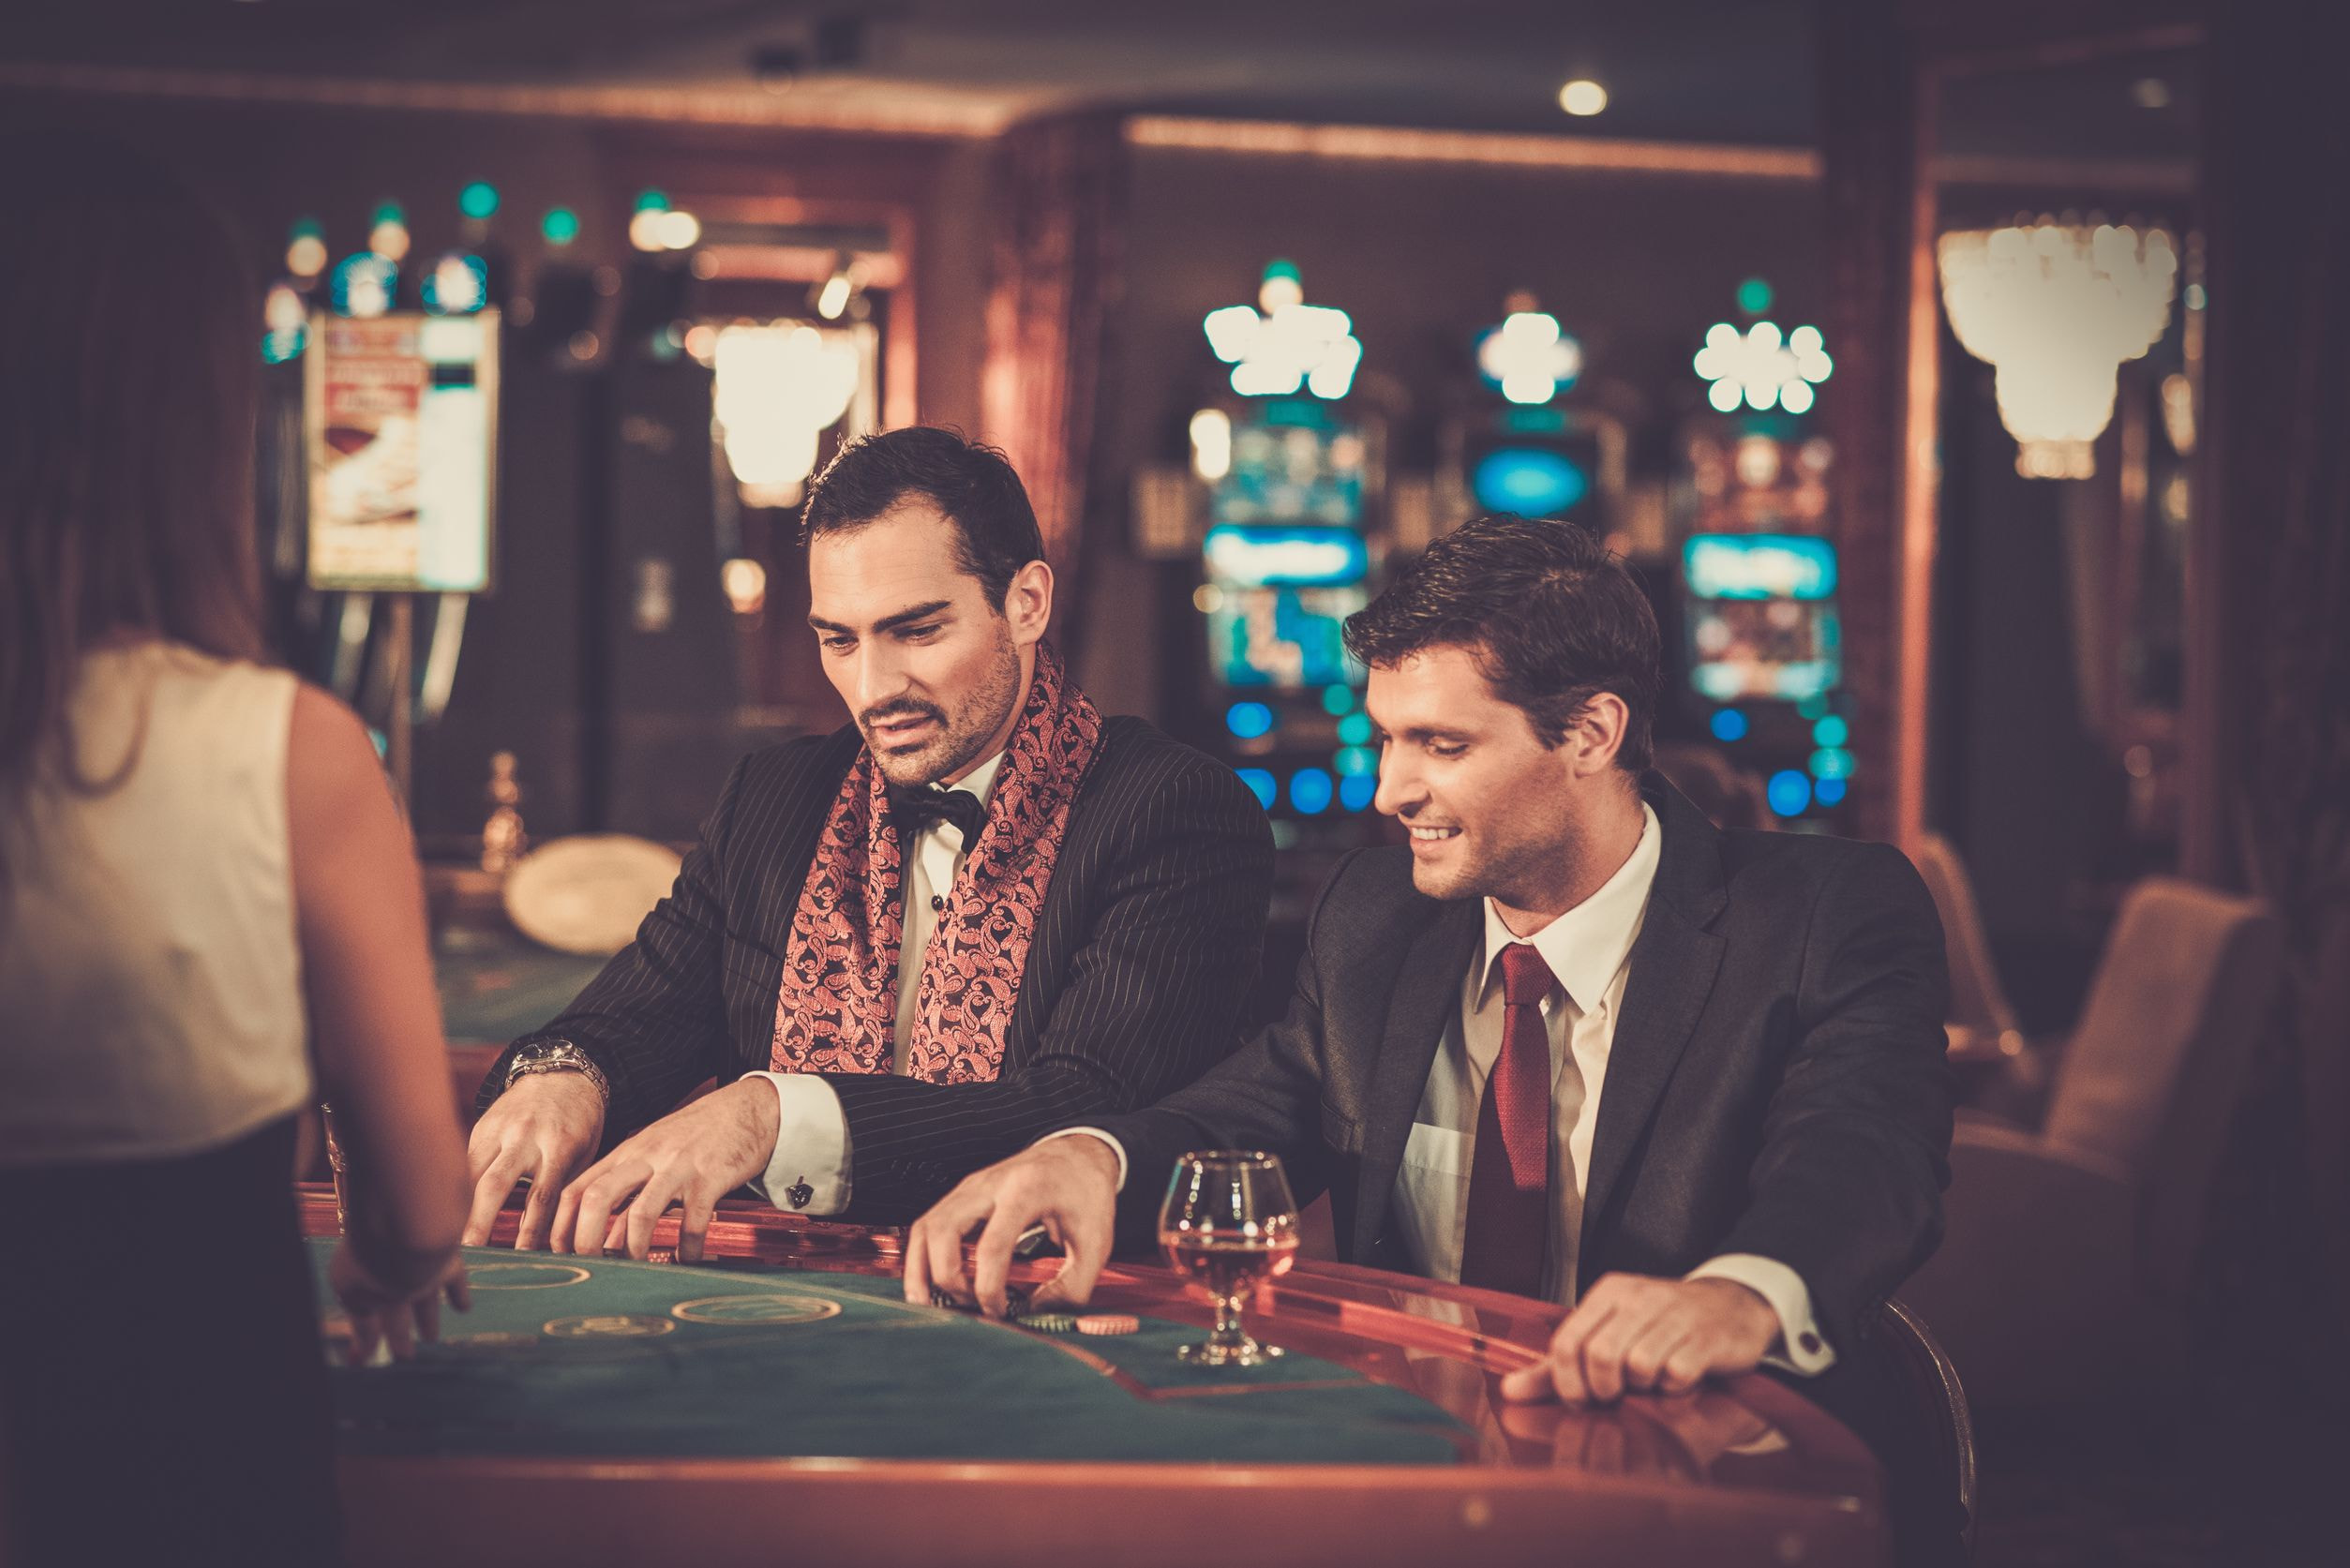 35435640 - two fashionable men in suits behind table in a casino